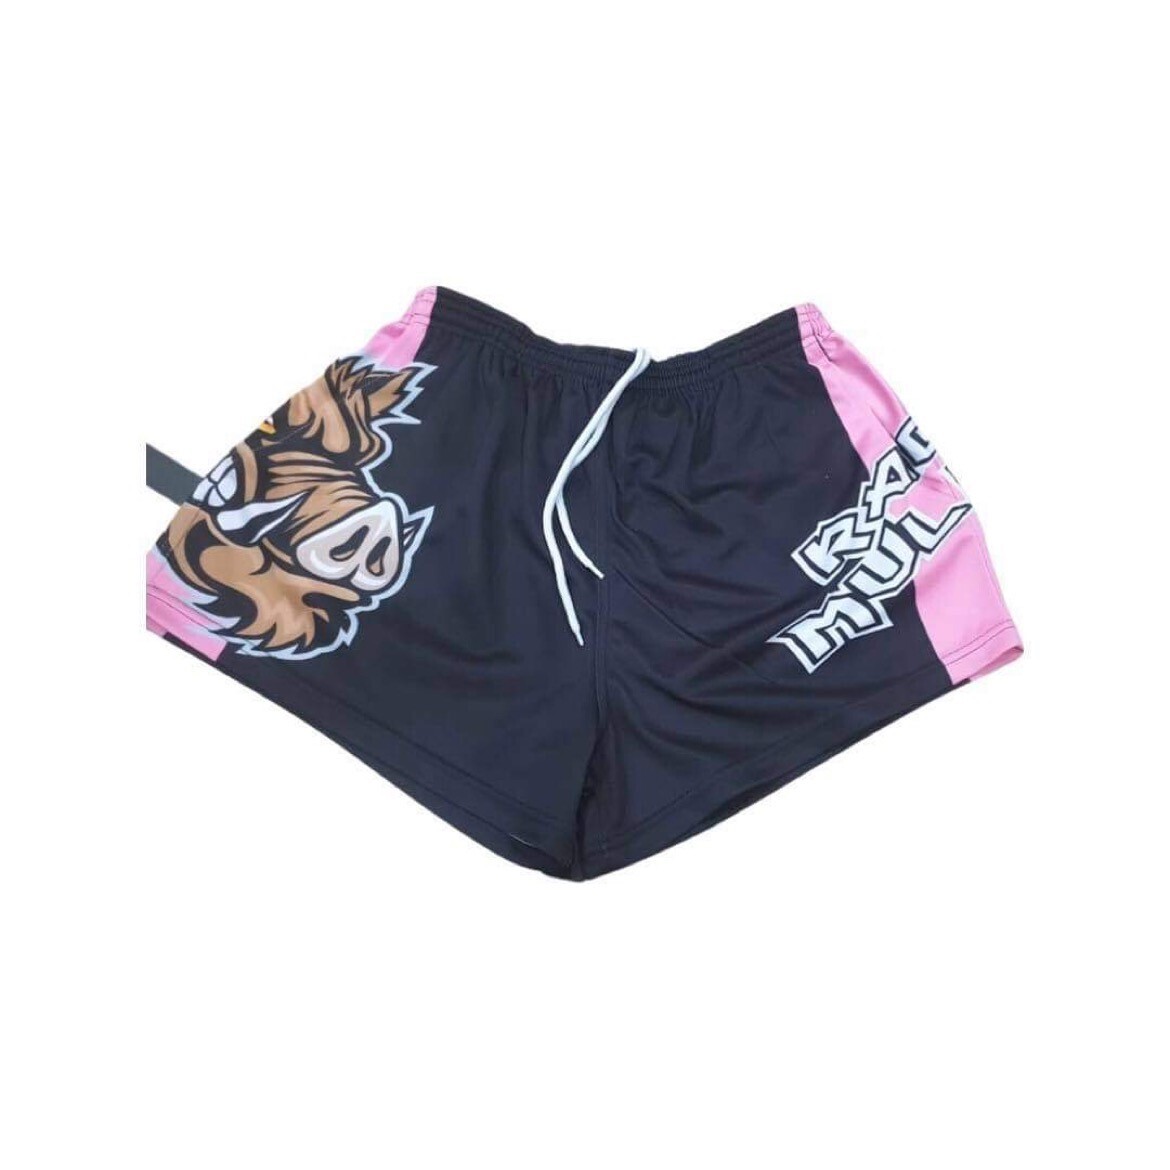 RUGBY SHORTS BOAR PINK, Size: 2XL